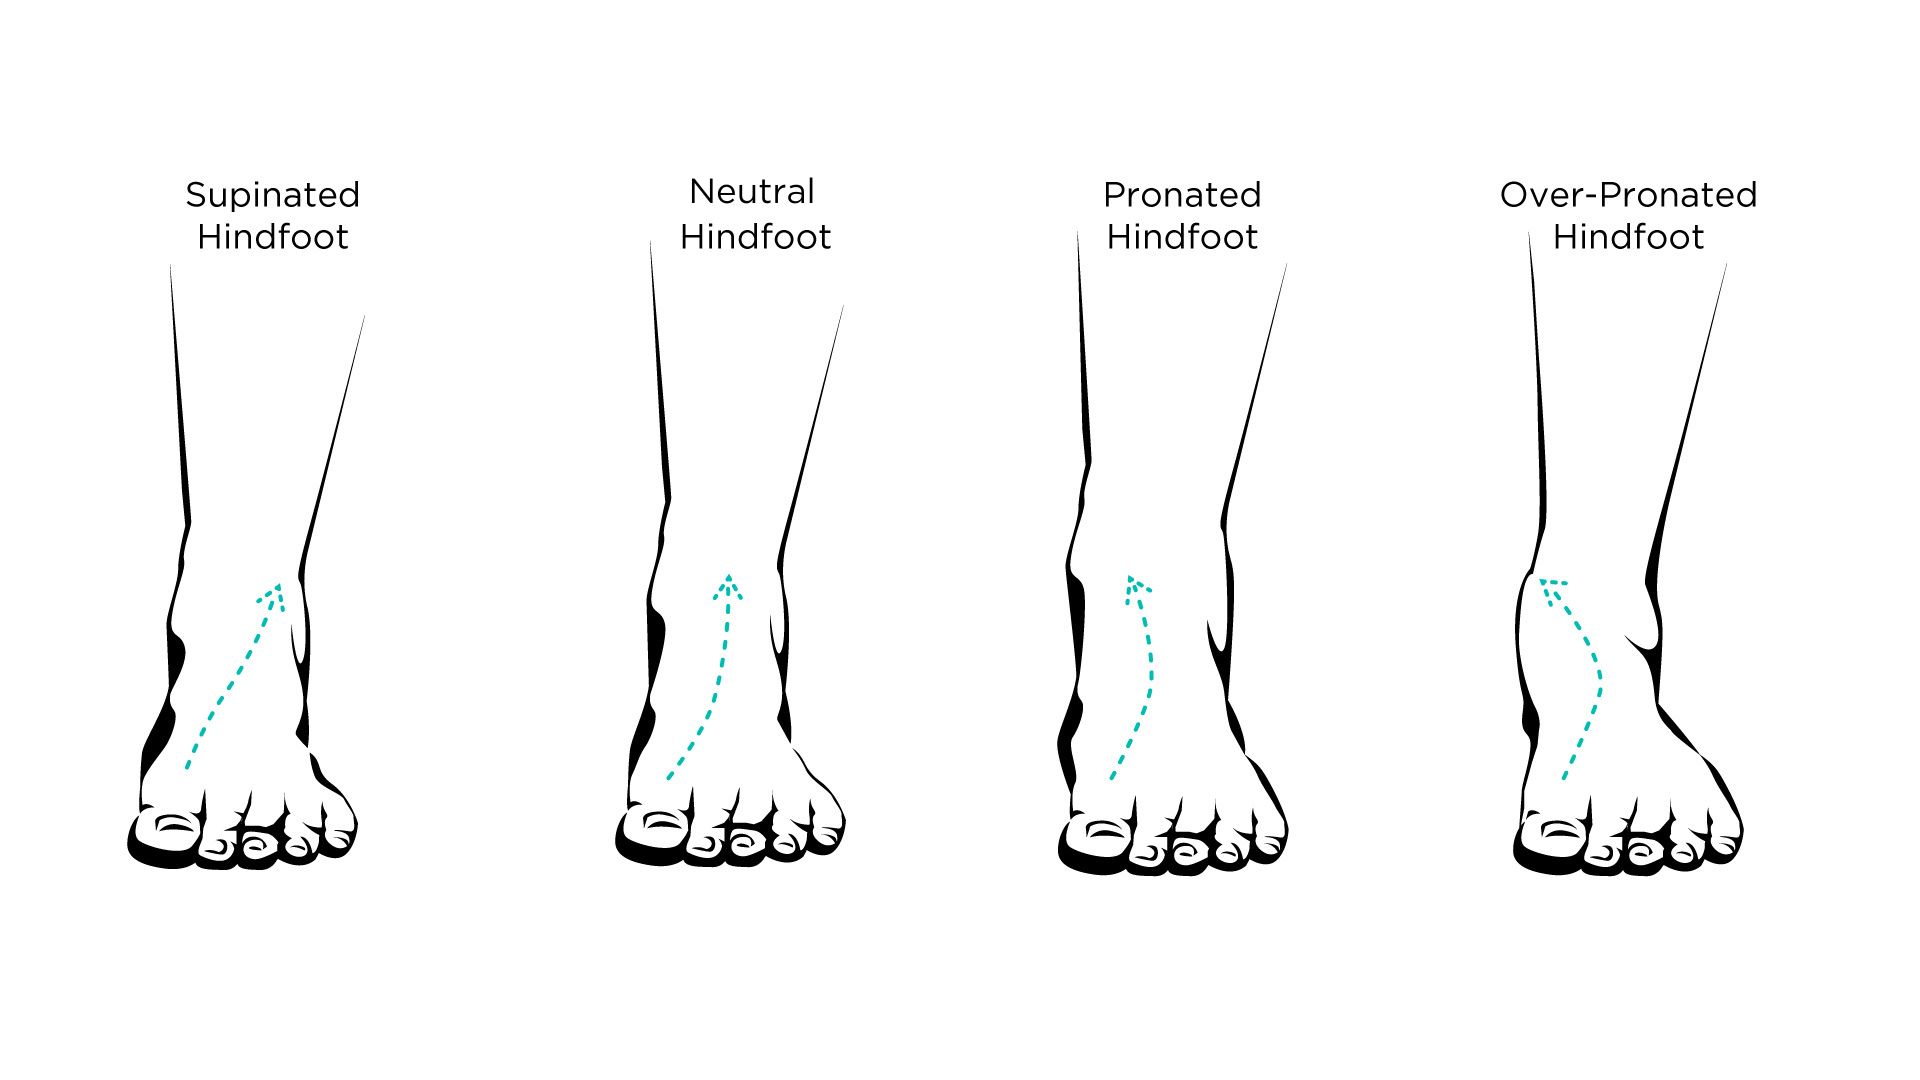 A diagram of the various stages of ankle pronation. Starting from the left, the stages are Supinated Hindfoot, Neutral Hindfoot, Pronated Hindfoot, Overpronated Hindfoot. 